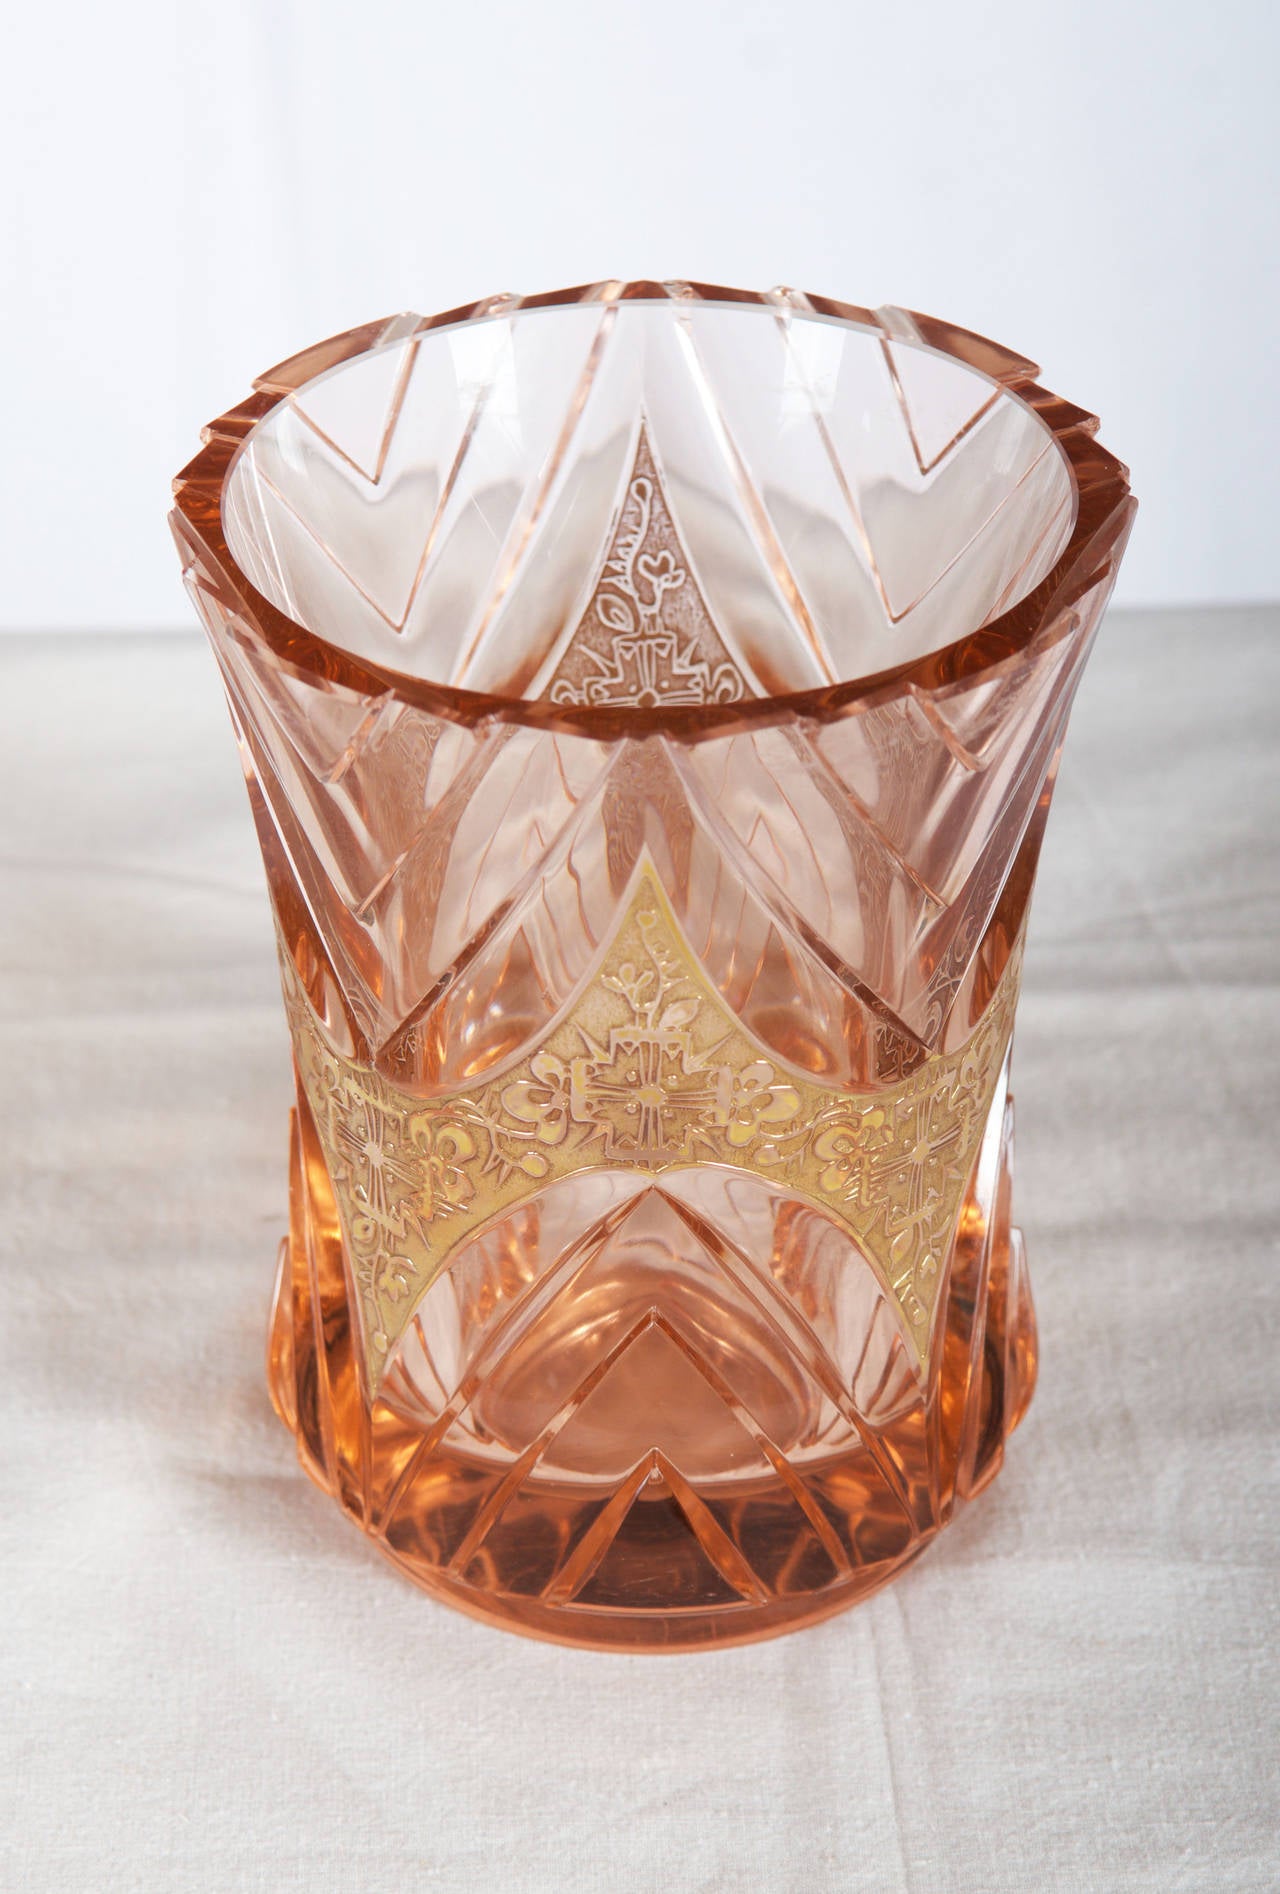 Art Deco bohemian crystal glass vase.
Beautiful condition 
Diamention: diameter 5.11in, 6.49in

shipping cost to US: 60 Euro